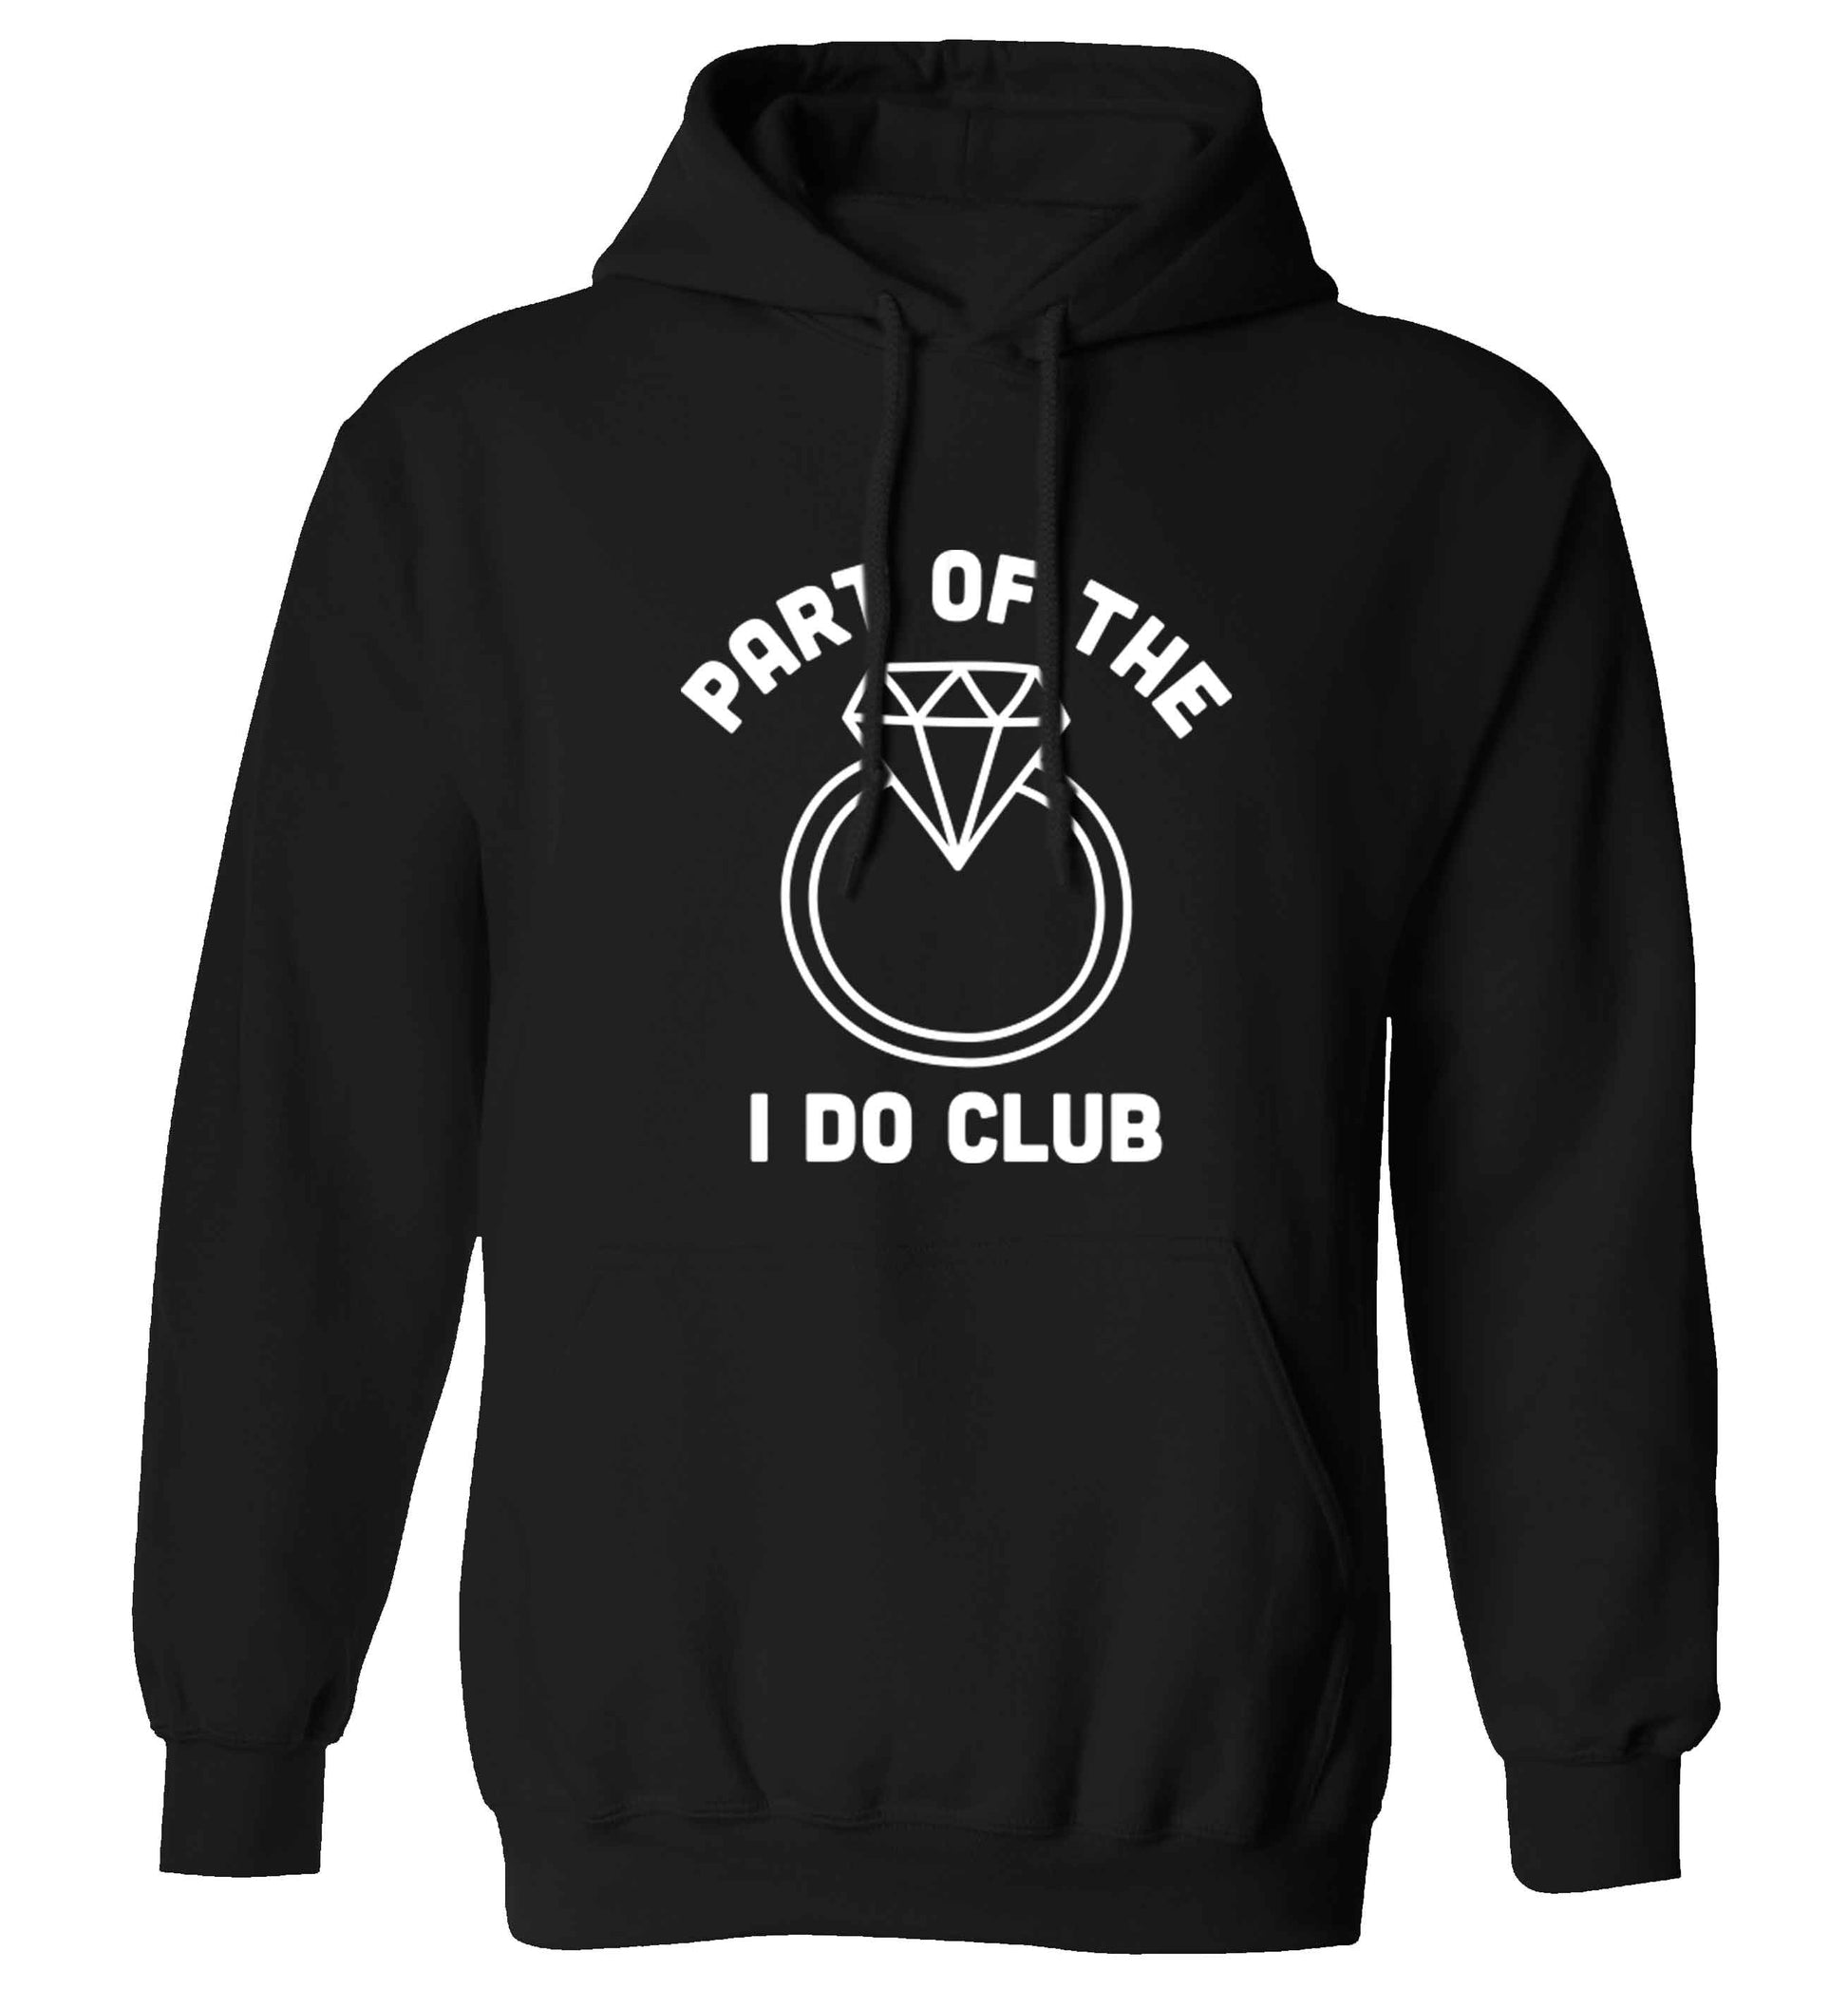 Part of the I do club adults unisex black hoodie 2XL